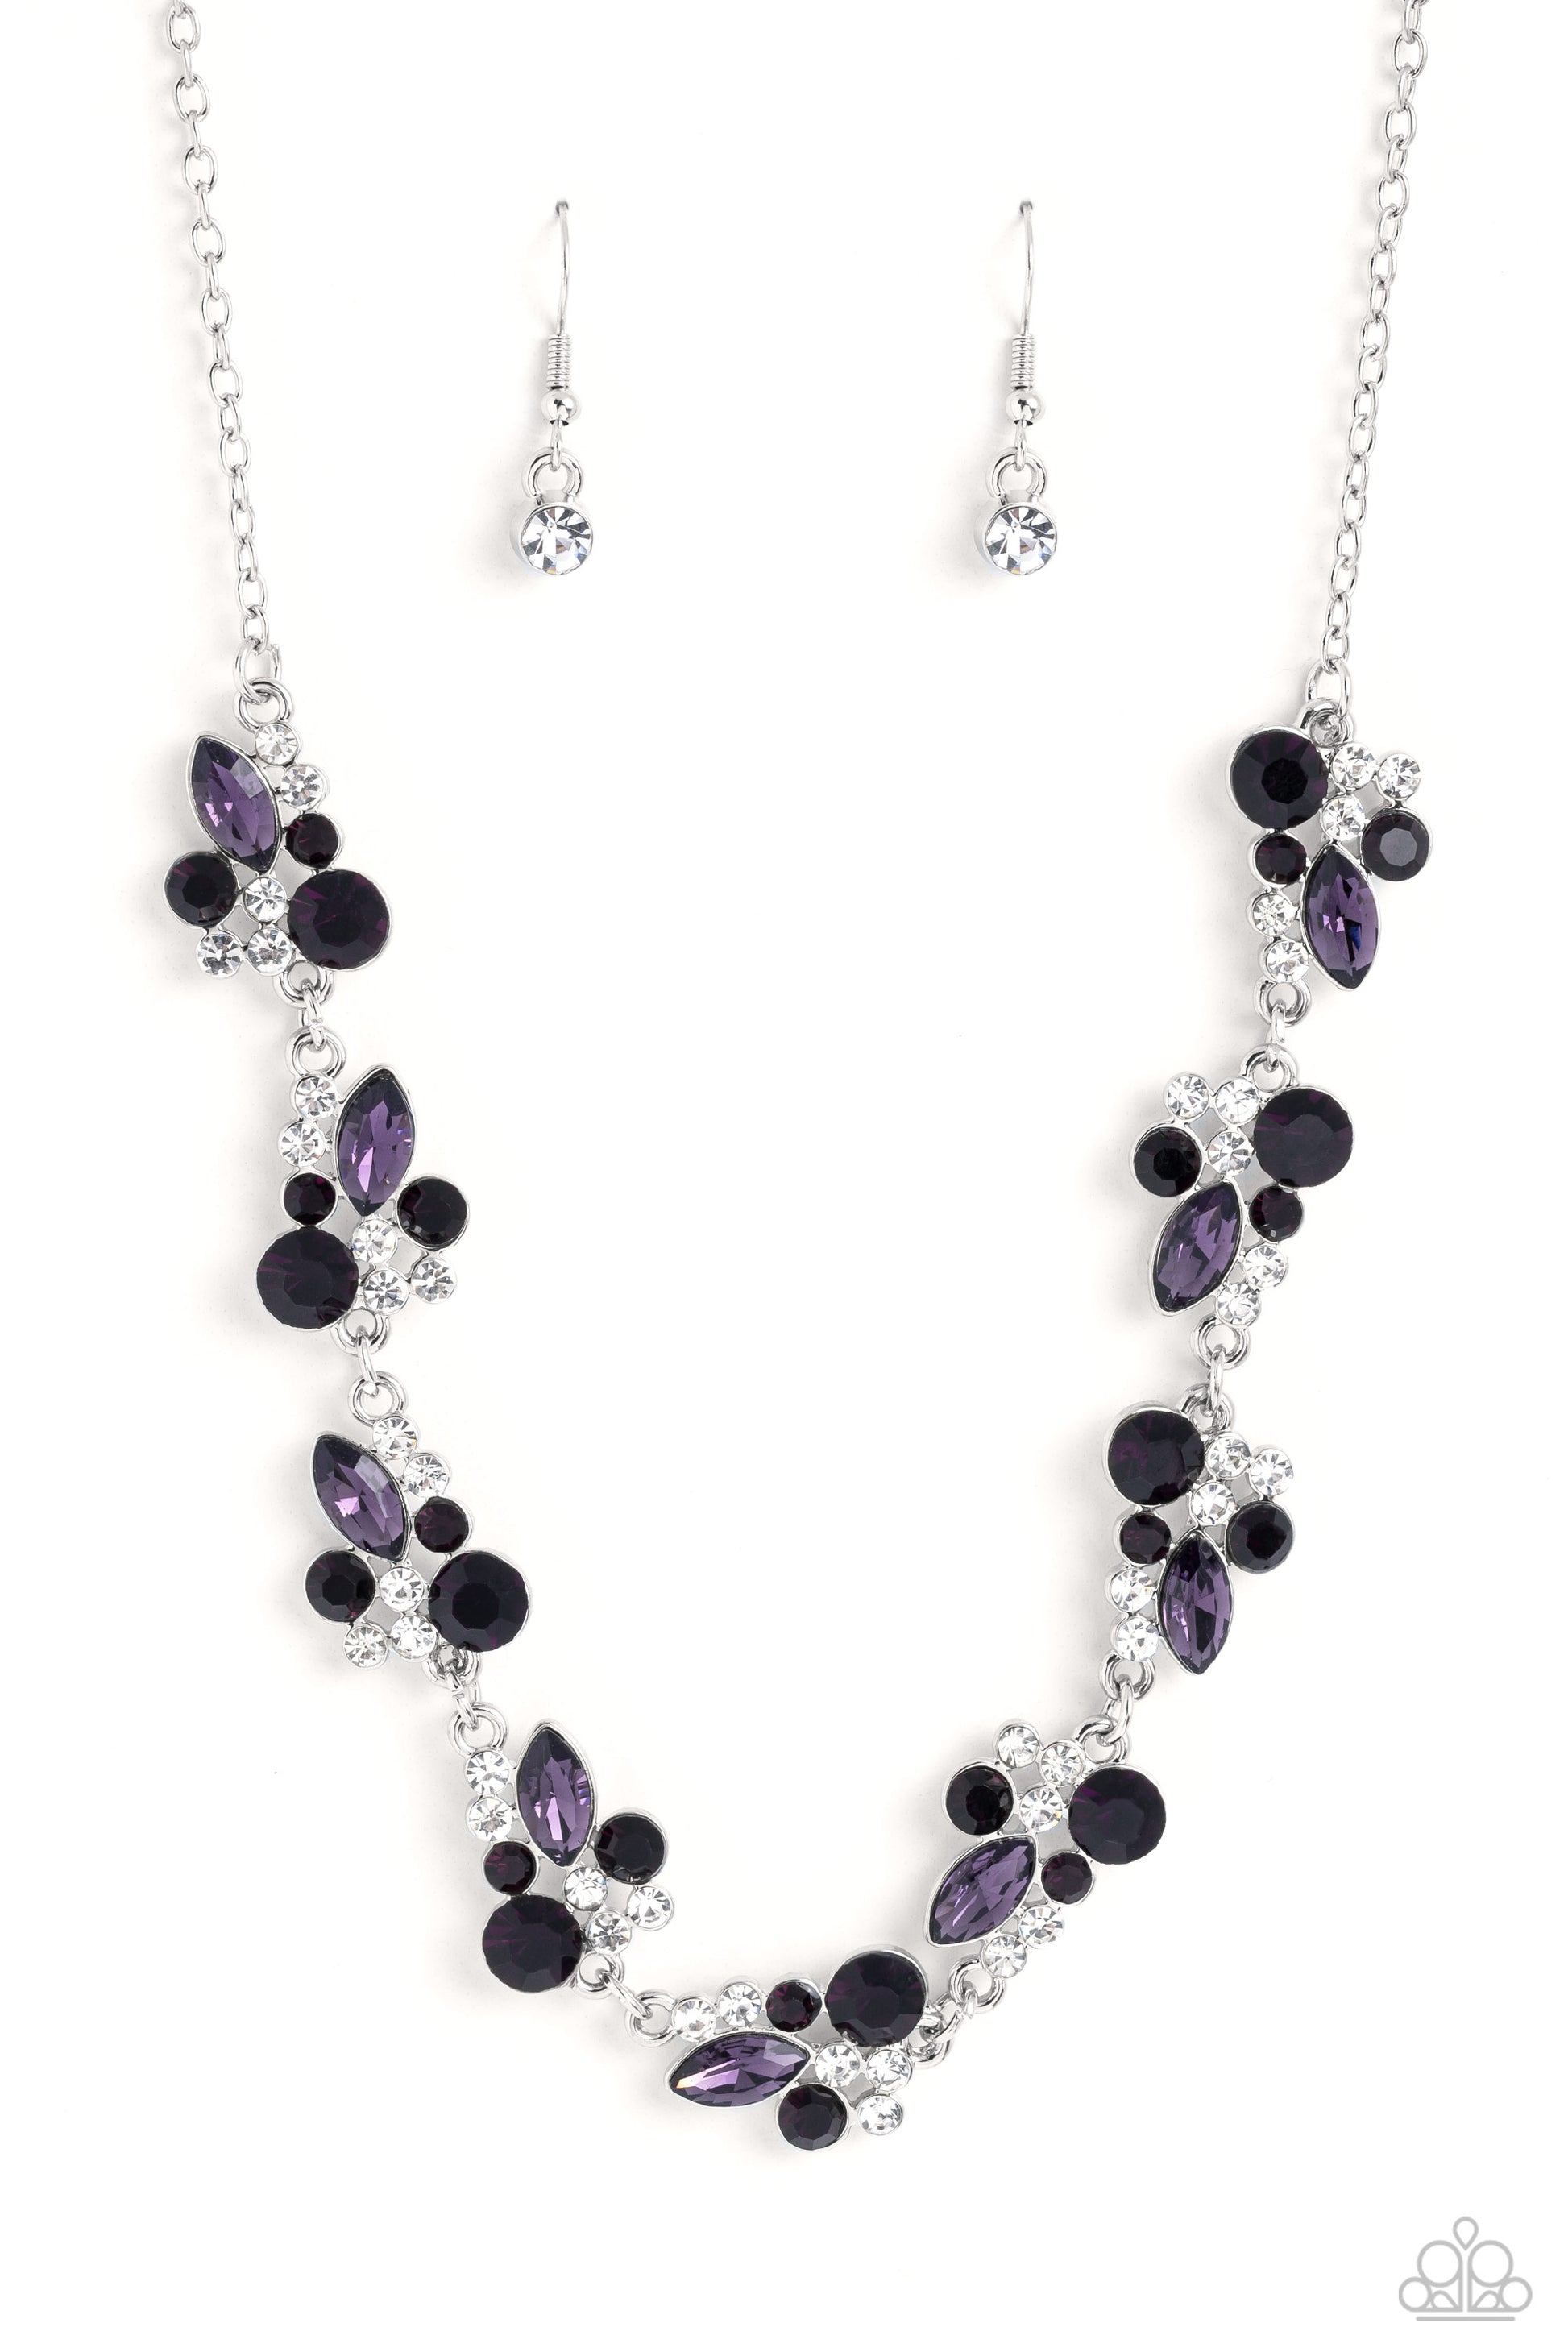 Swimming in Sparkles - purple - Paparazzi necklace